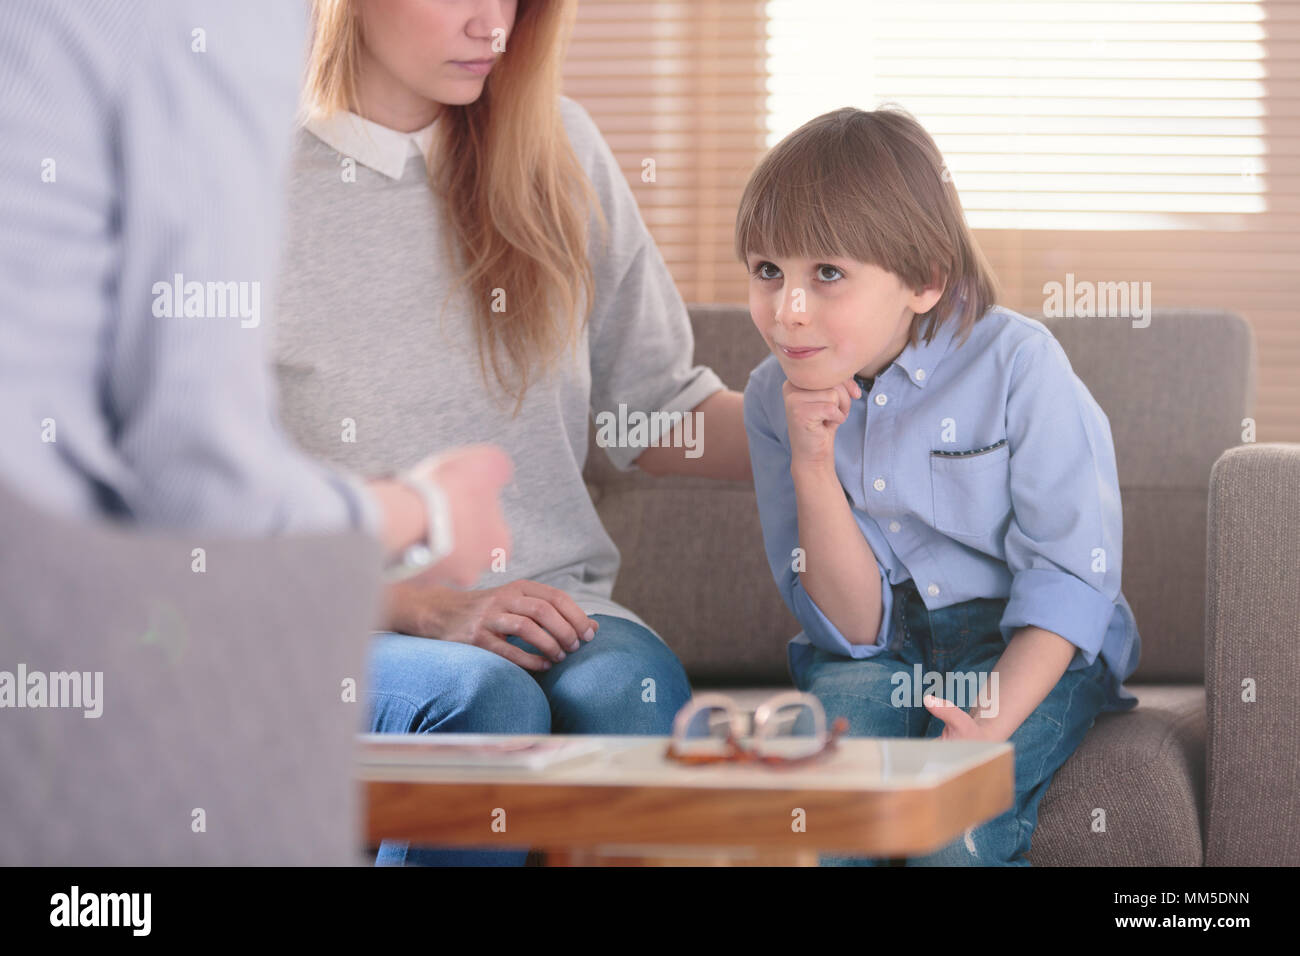 Close-up of smiling autistic boy listening to a counselor during therapy Stock Photo